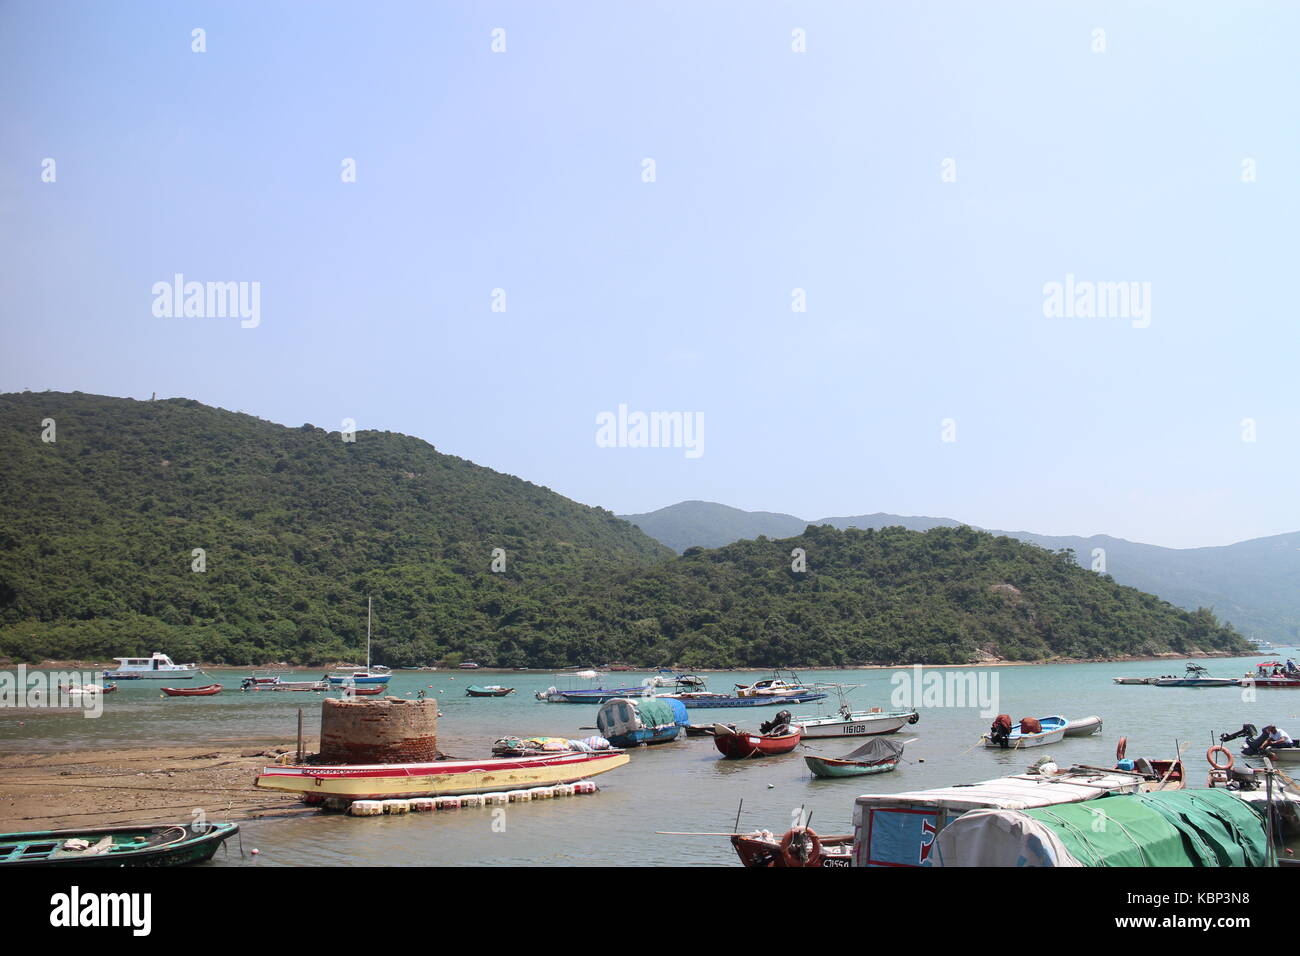 FISHING BOAT STOP AT THE INNER BAY Stock Photo